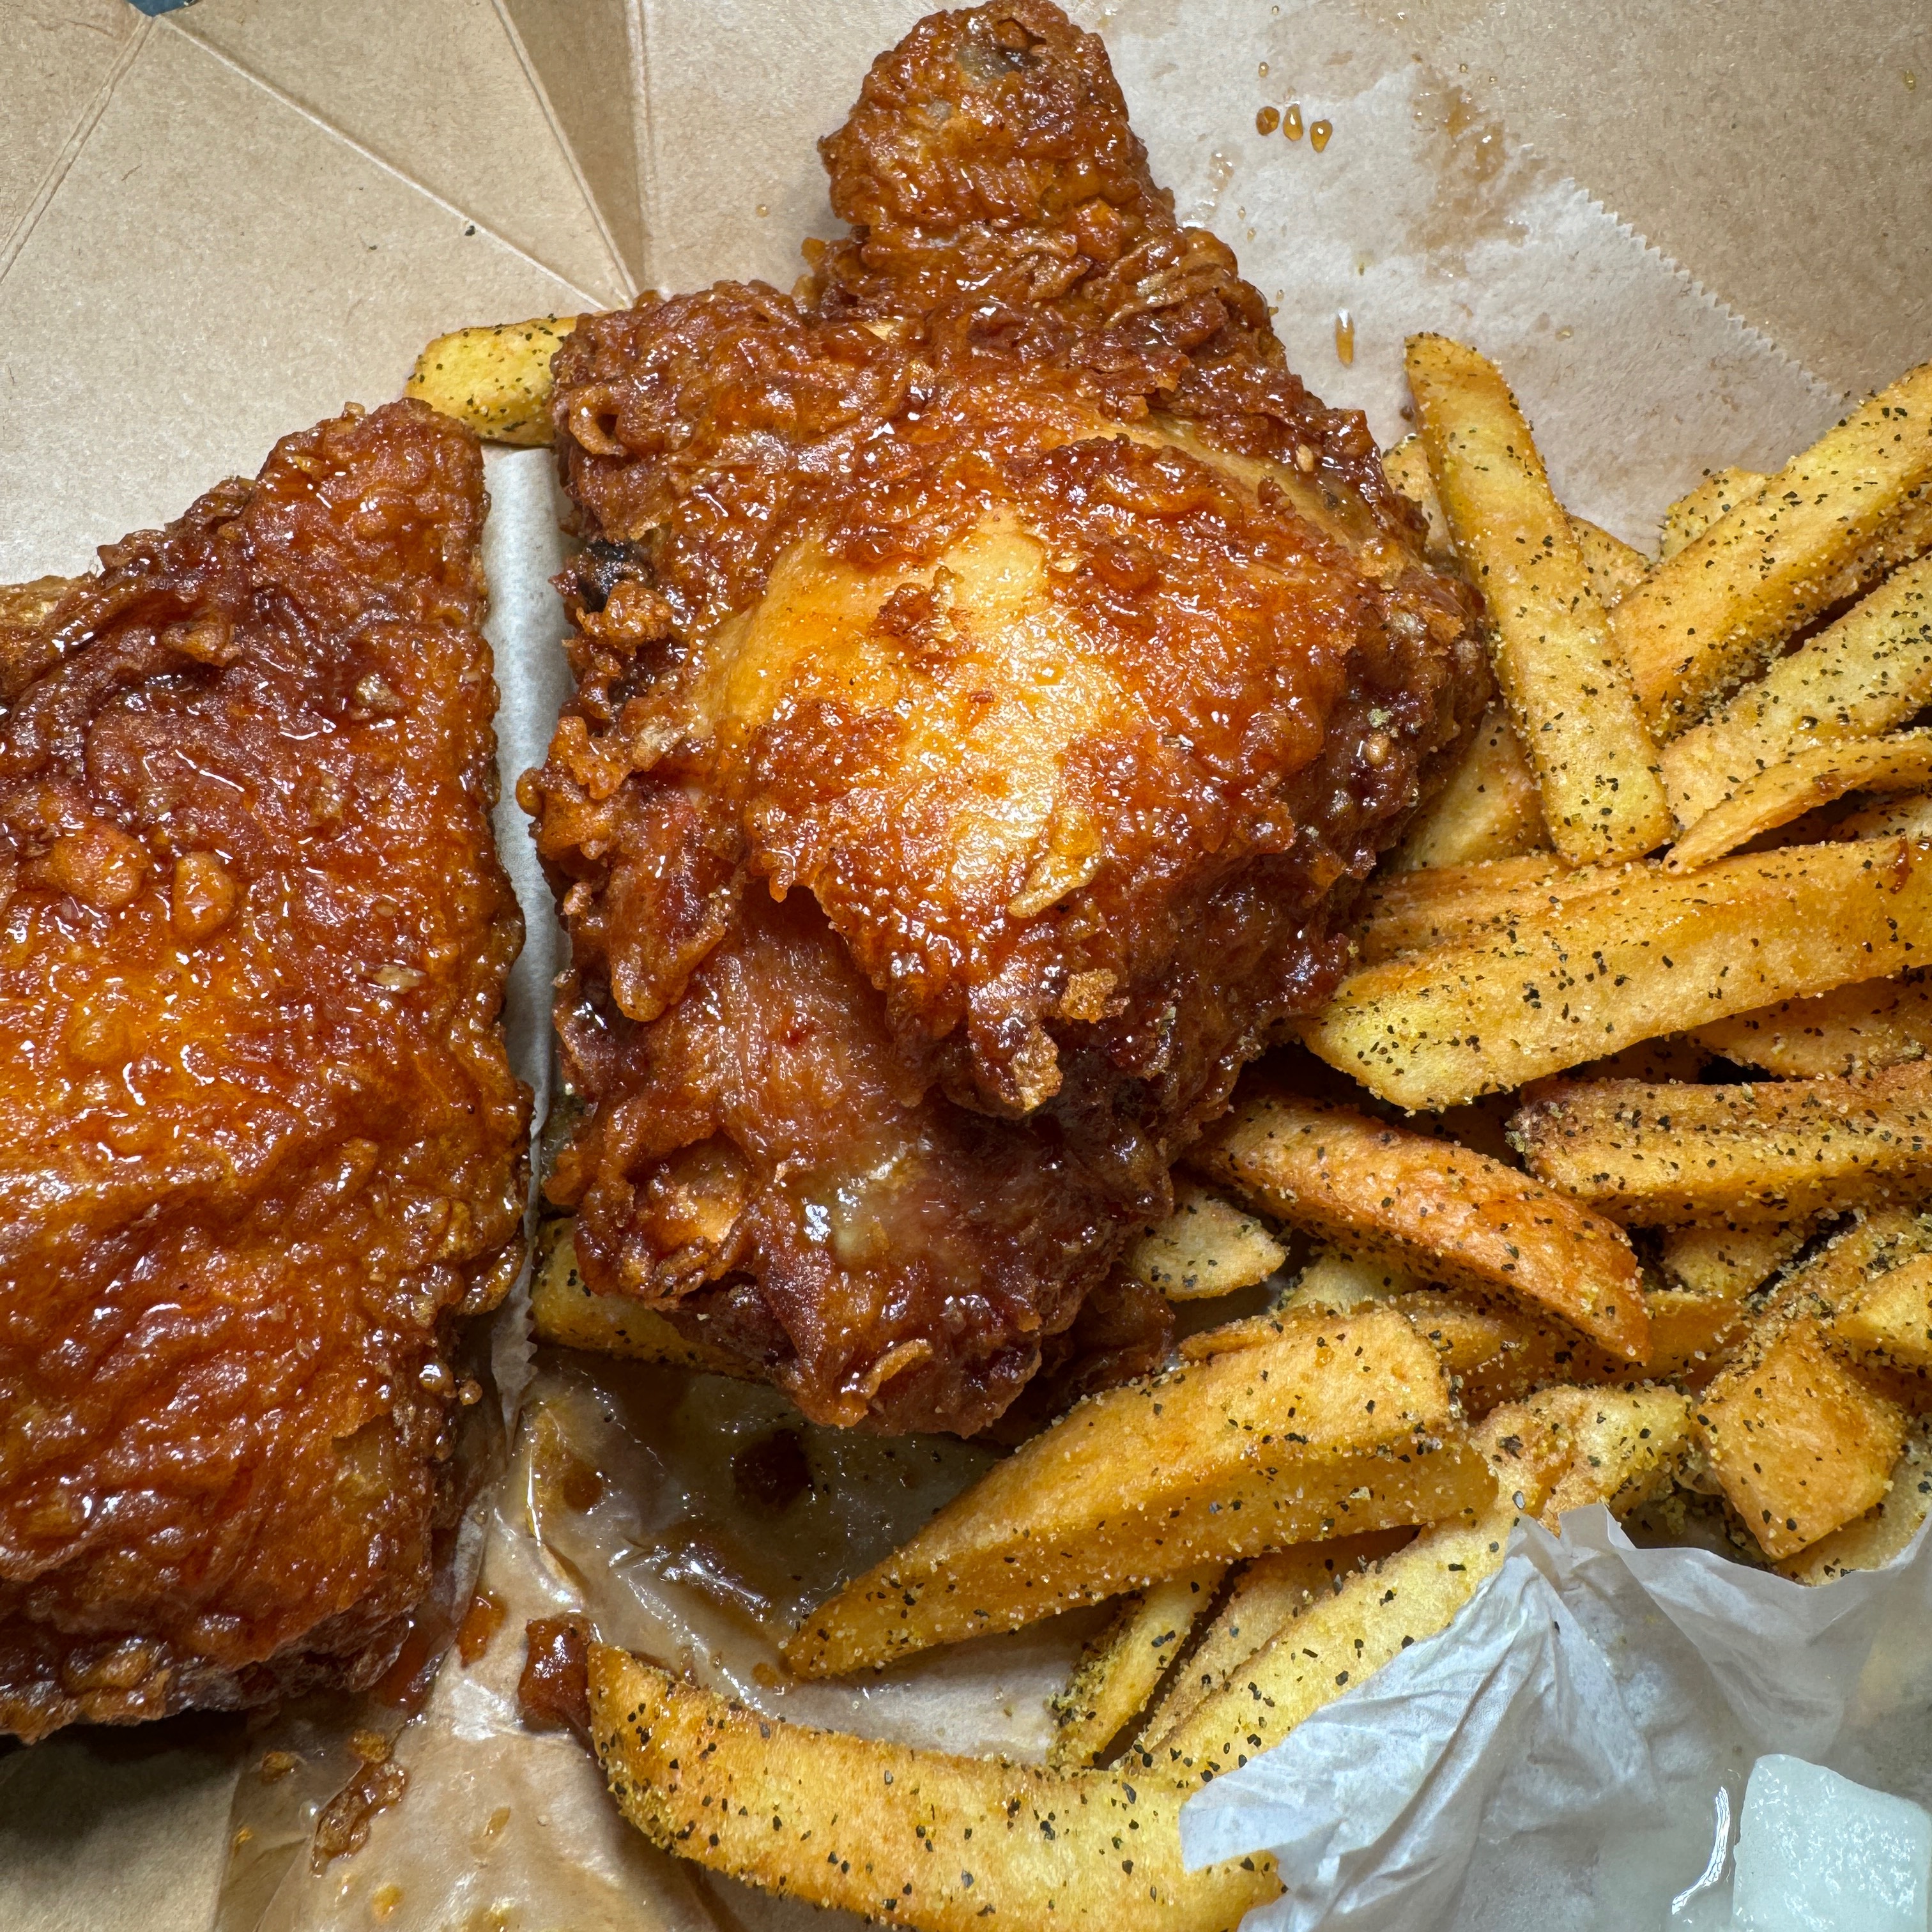 3 Pc Thigh & Leg With Fries $14 at Honey Dress Fried Chicken on #foodmento http://foodmento.com/place/14770